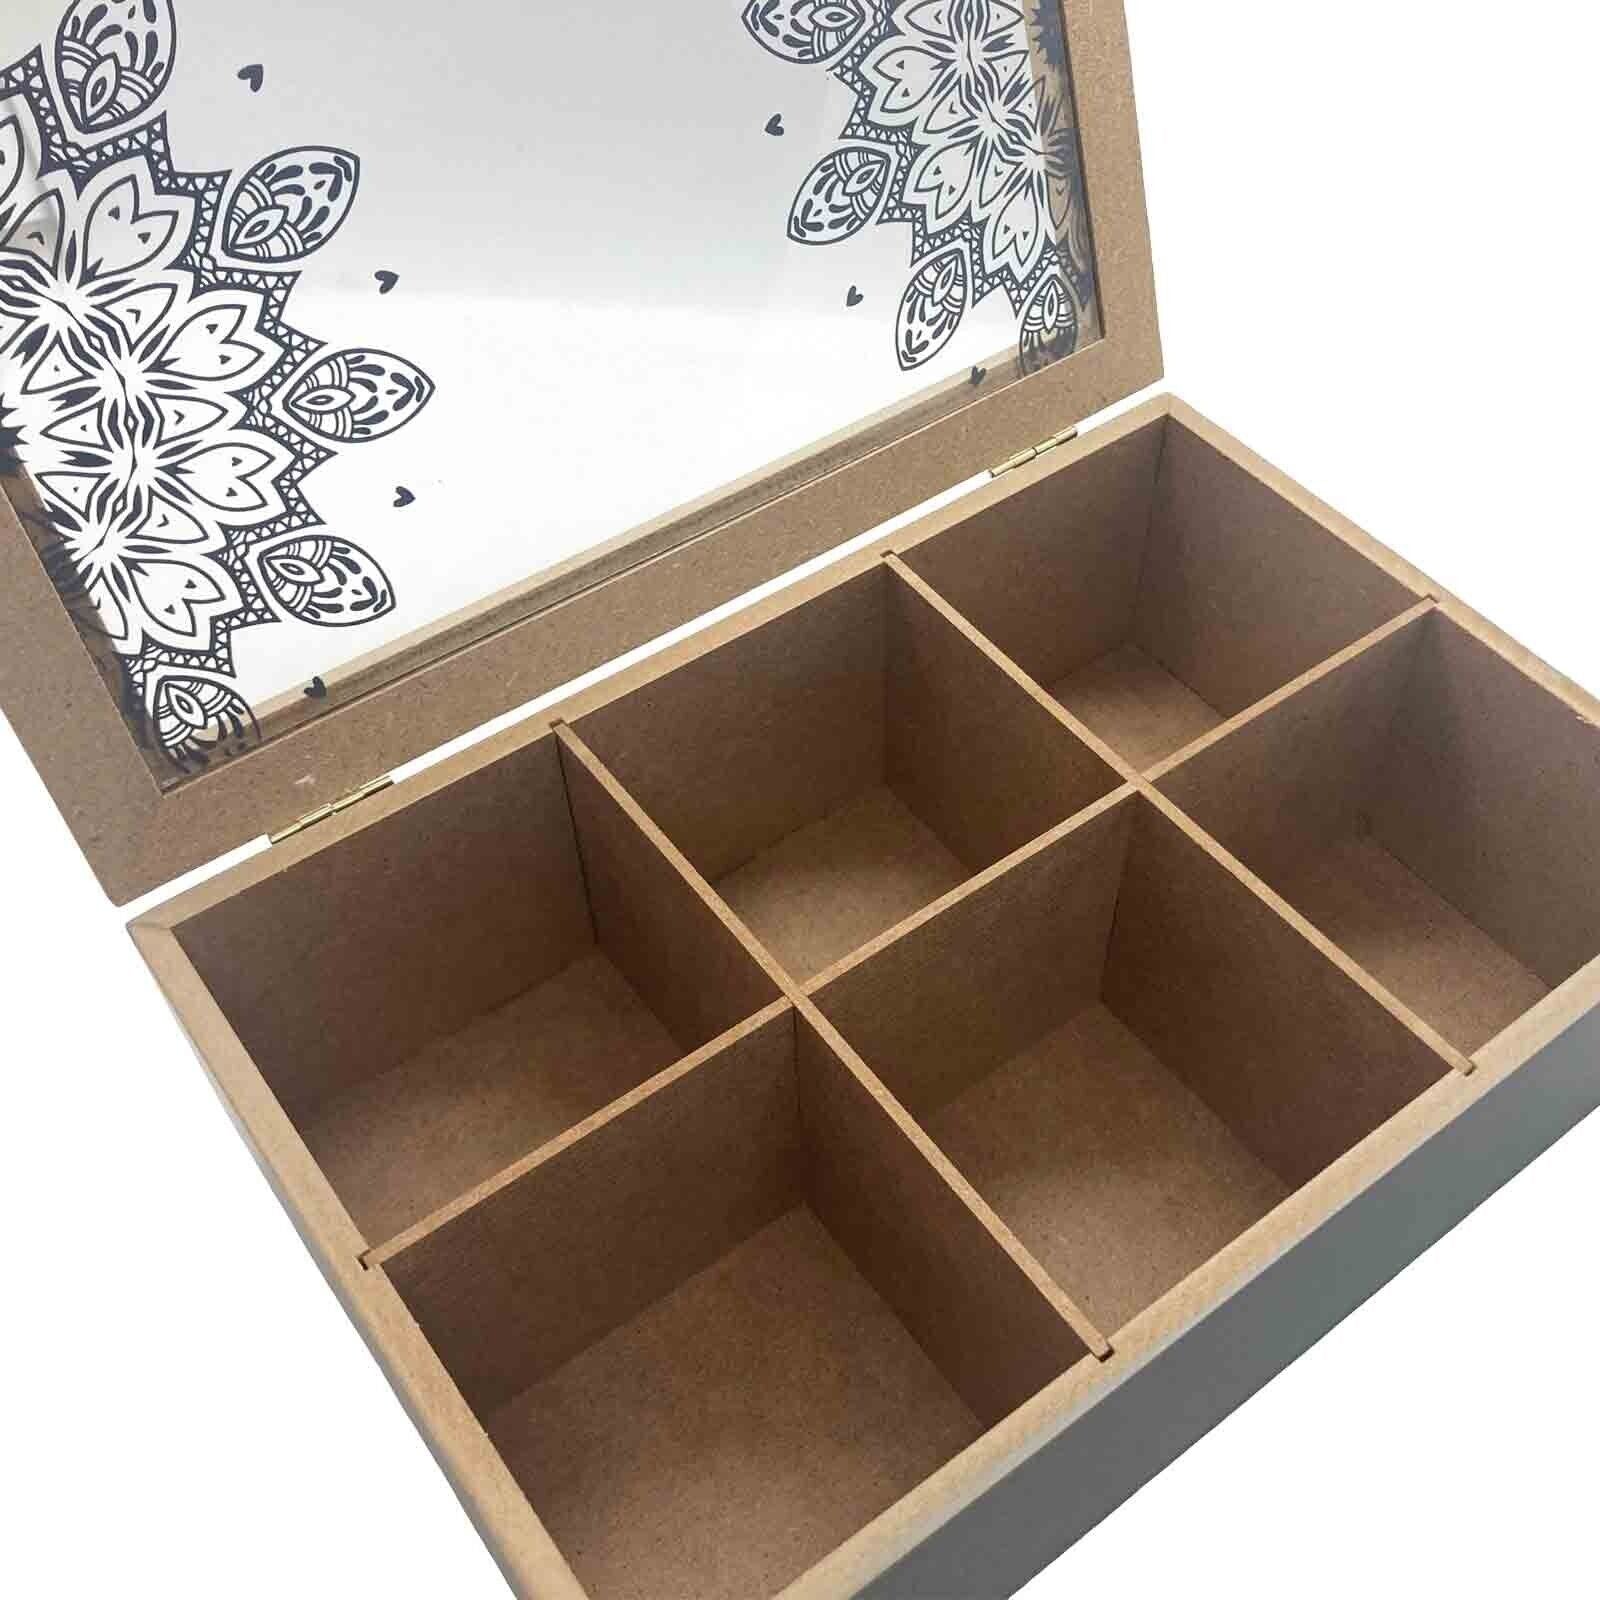 Mandala Home Tea Box 6 Compartments Wooden Box with Glass Lid